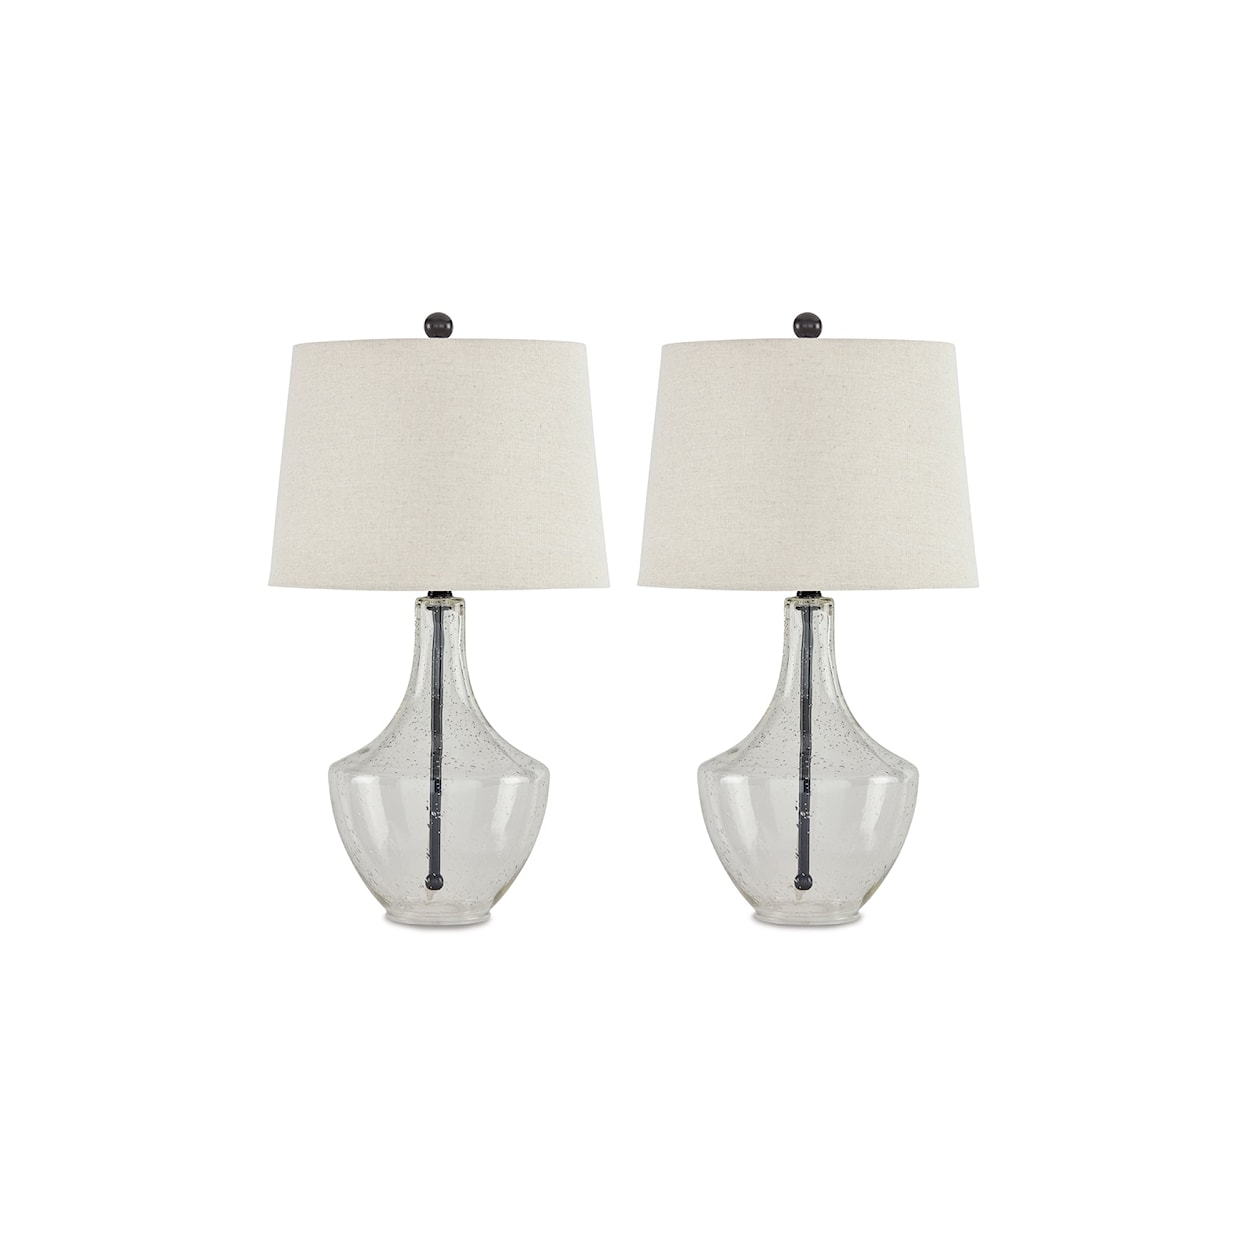 Signature Design by Ashley Gregsby Glass Table Lamp (Set of 2)